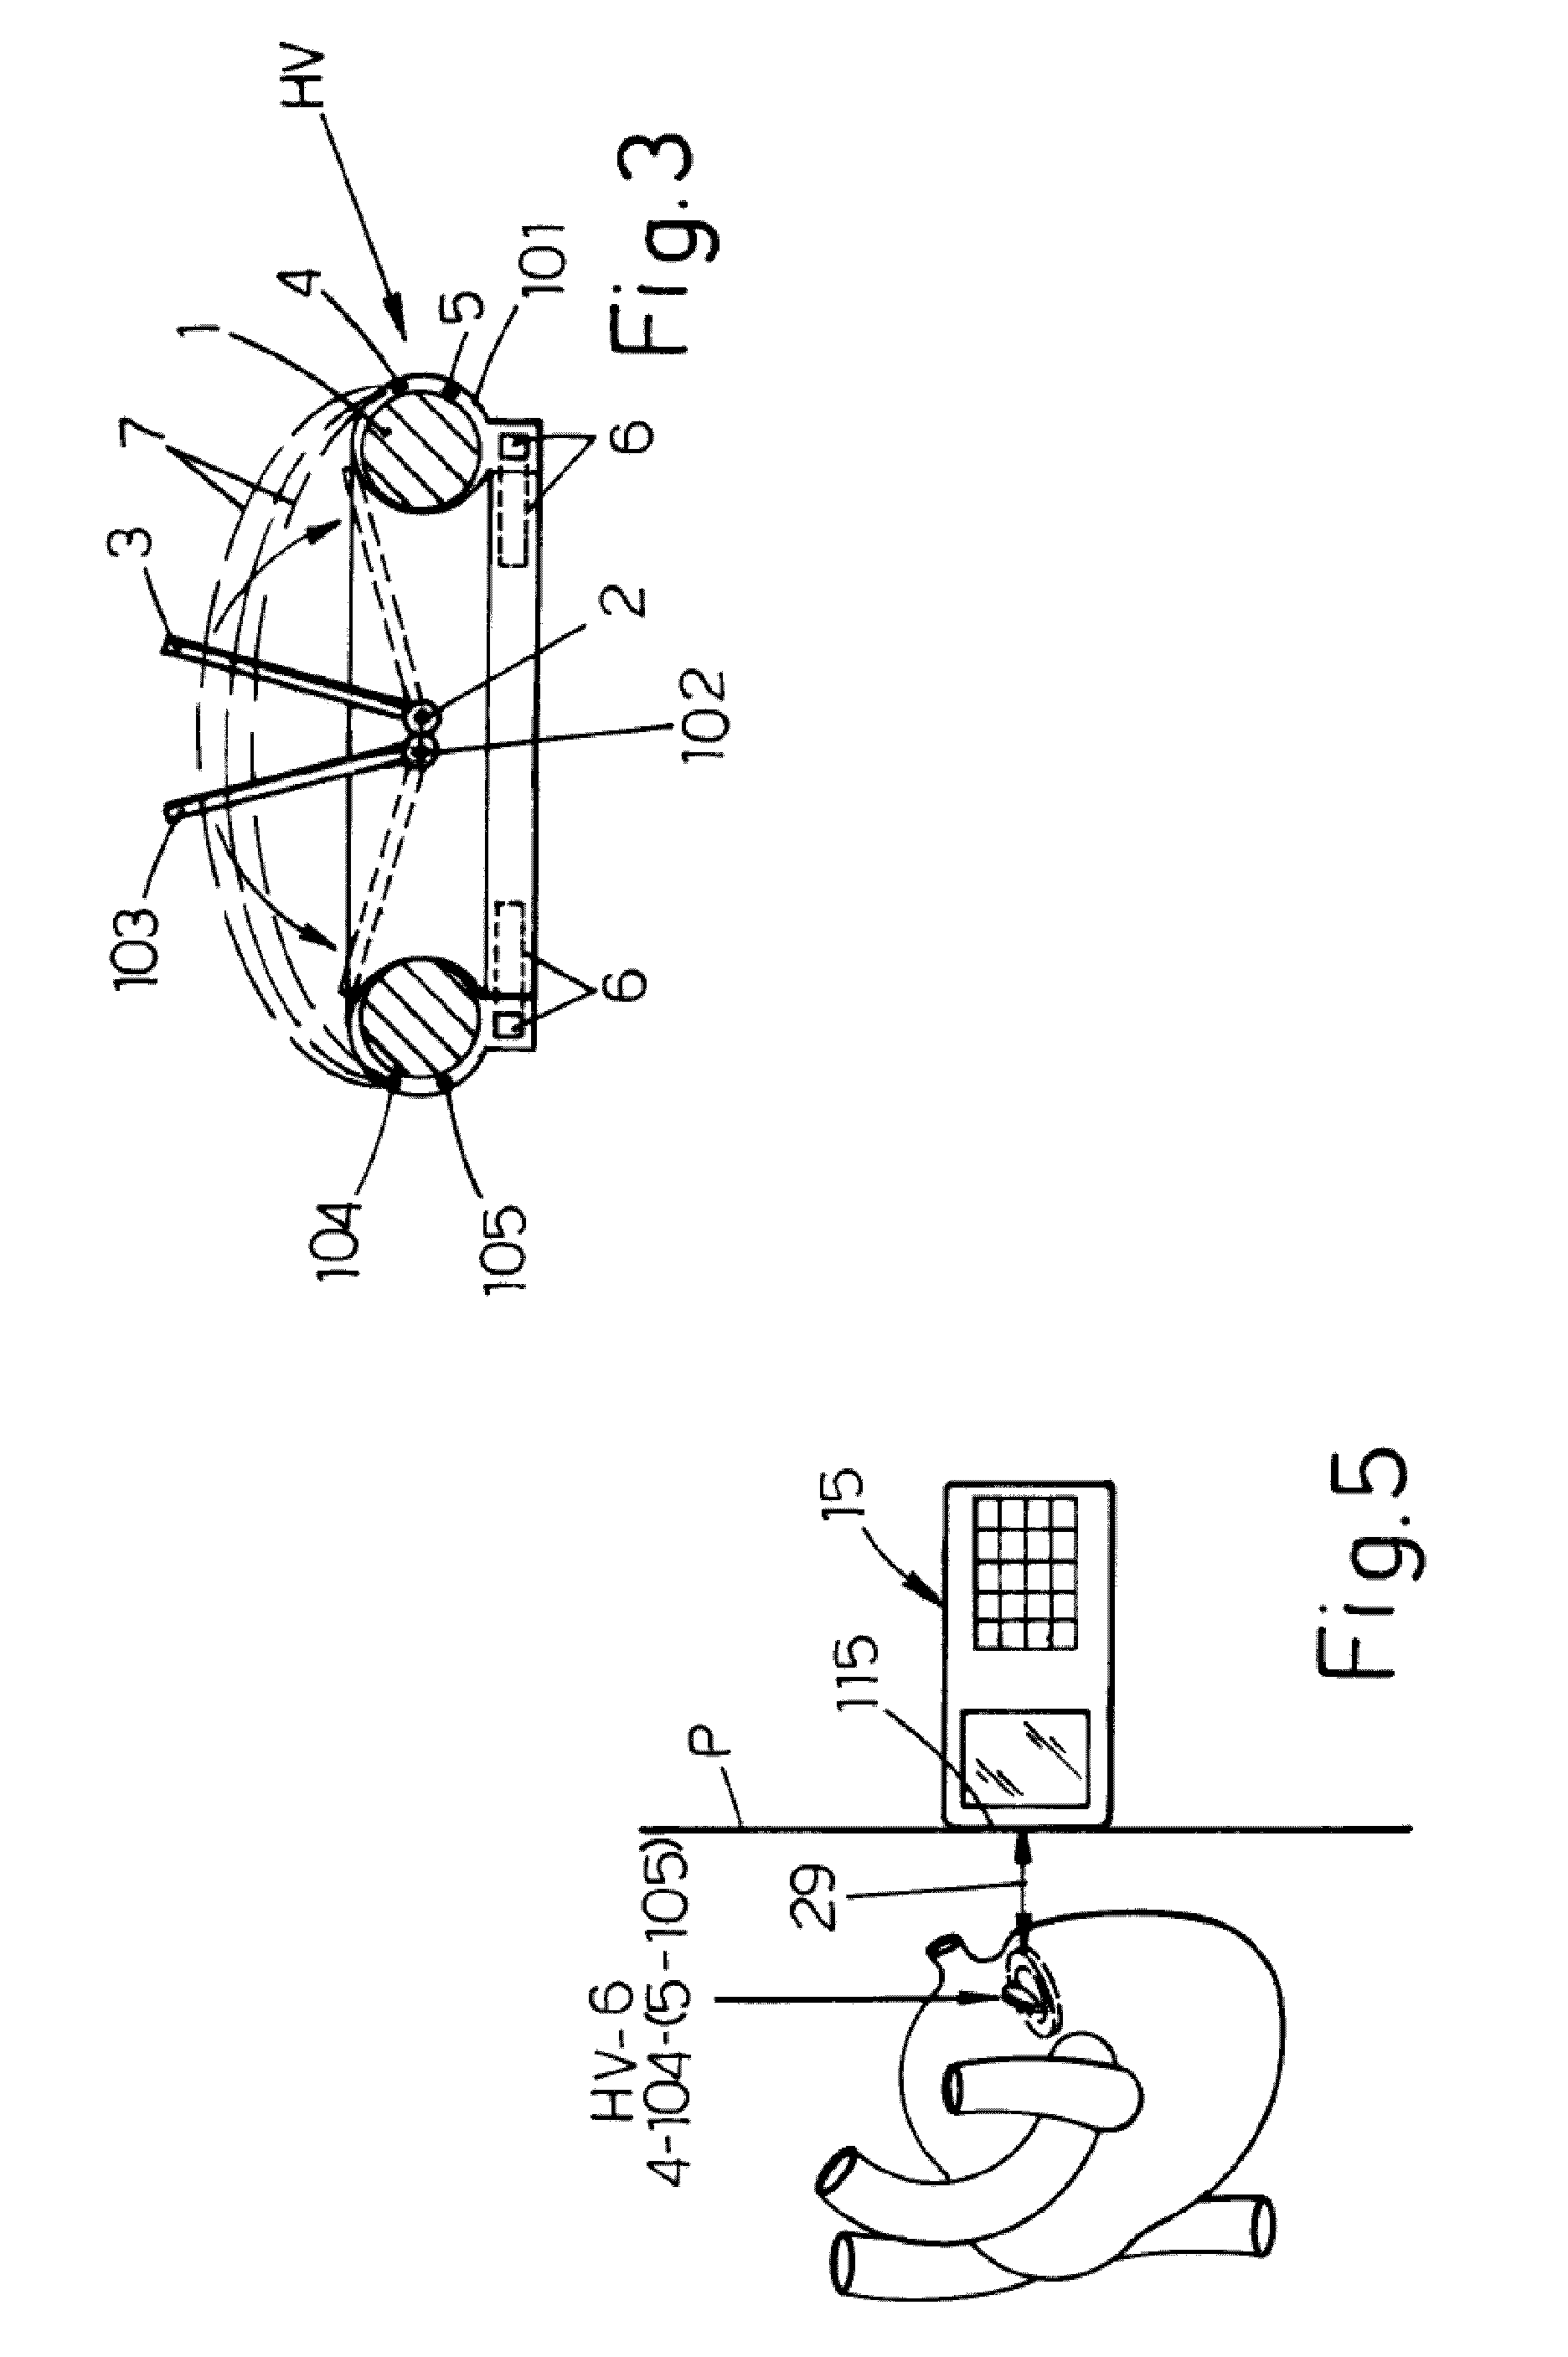 Heart valve prosthesis with integrated electronic circuit for measuring intravalvular electrical impedance, and system for monitoring functionality of the prosthesis